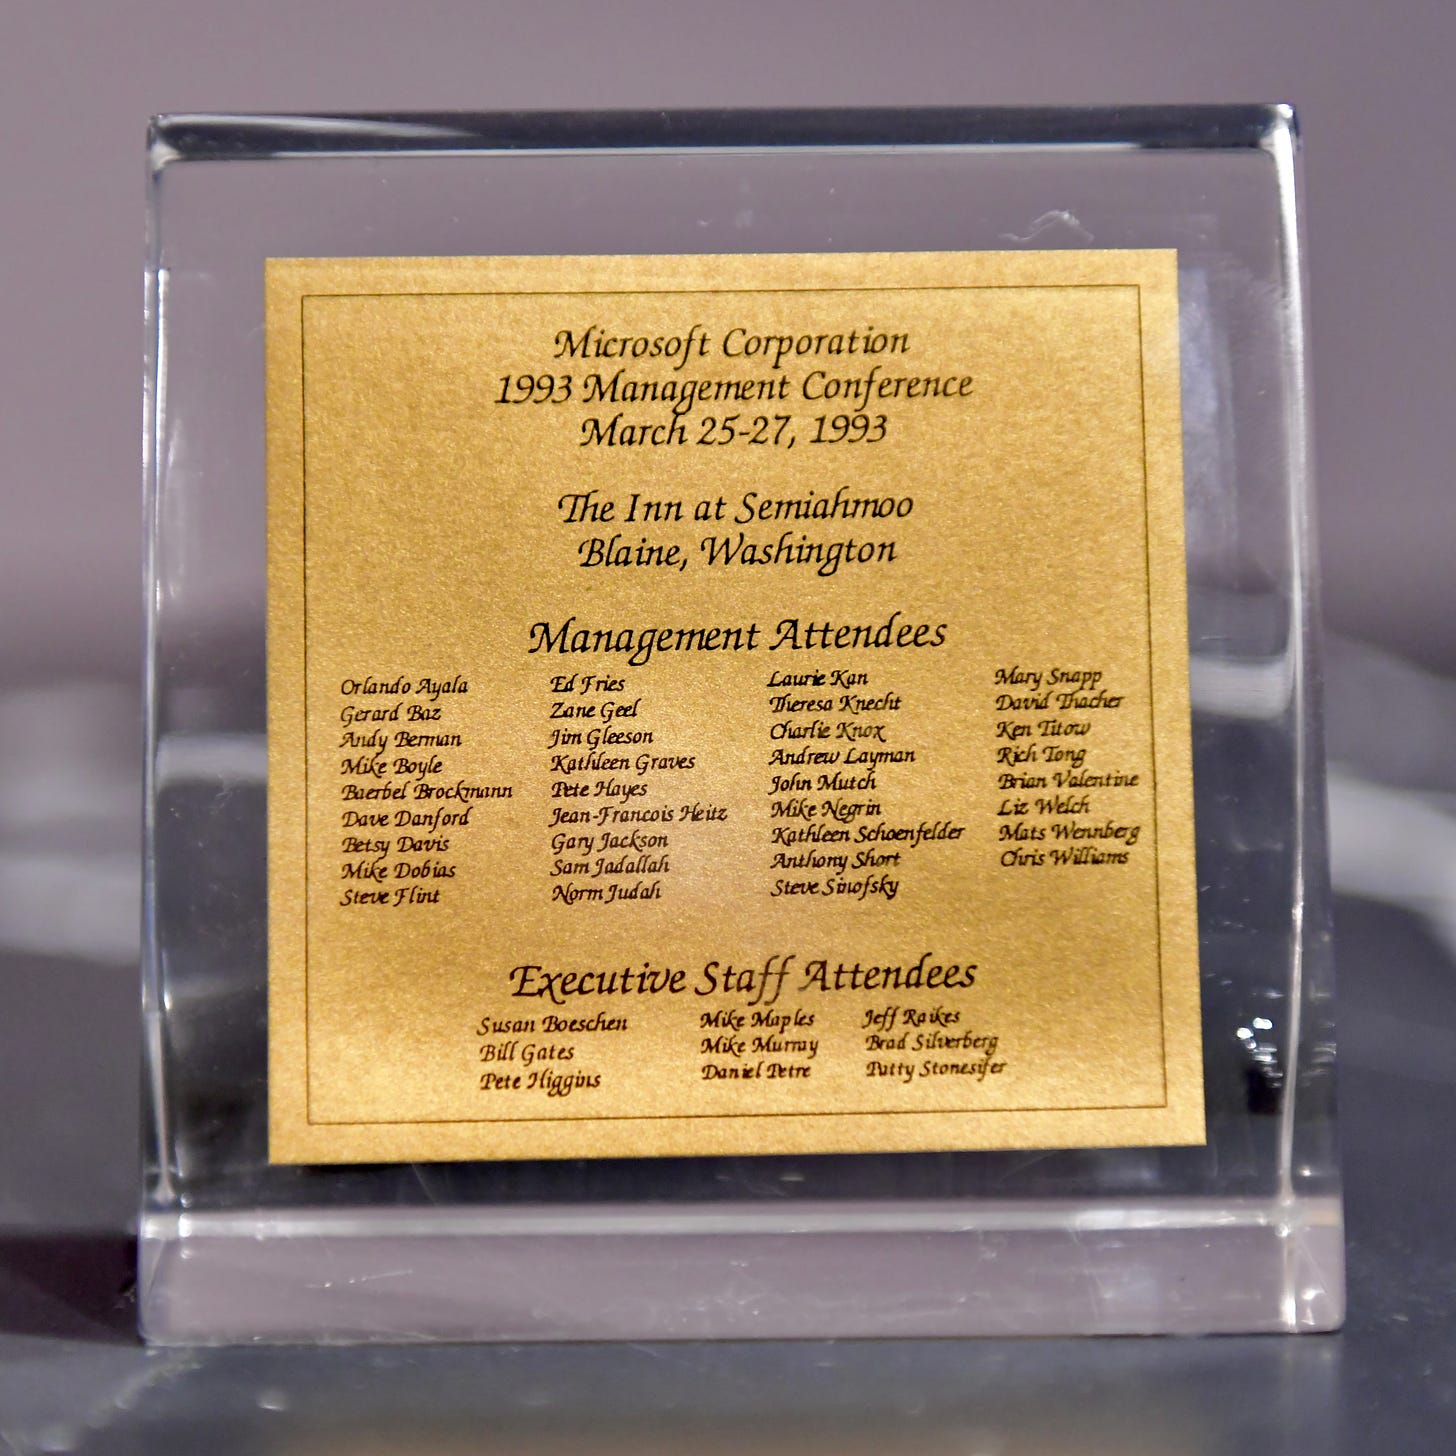 Lucite block to place on desk. Title is "Microsoft Corporation 1993 Management conference" with list of attendees and executive staff.